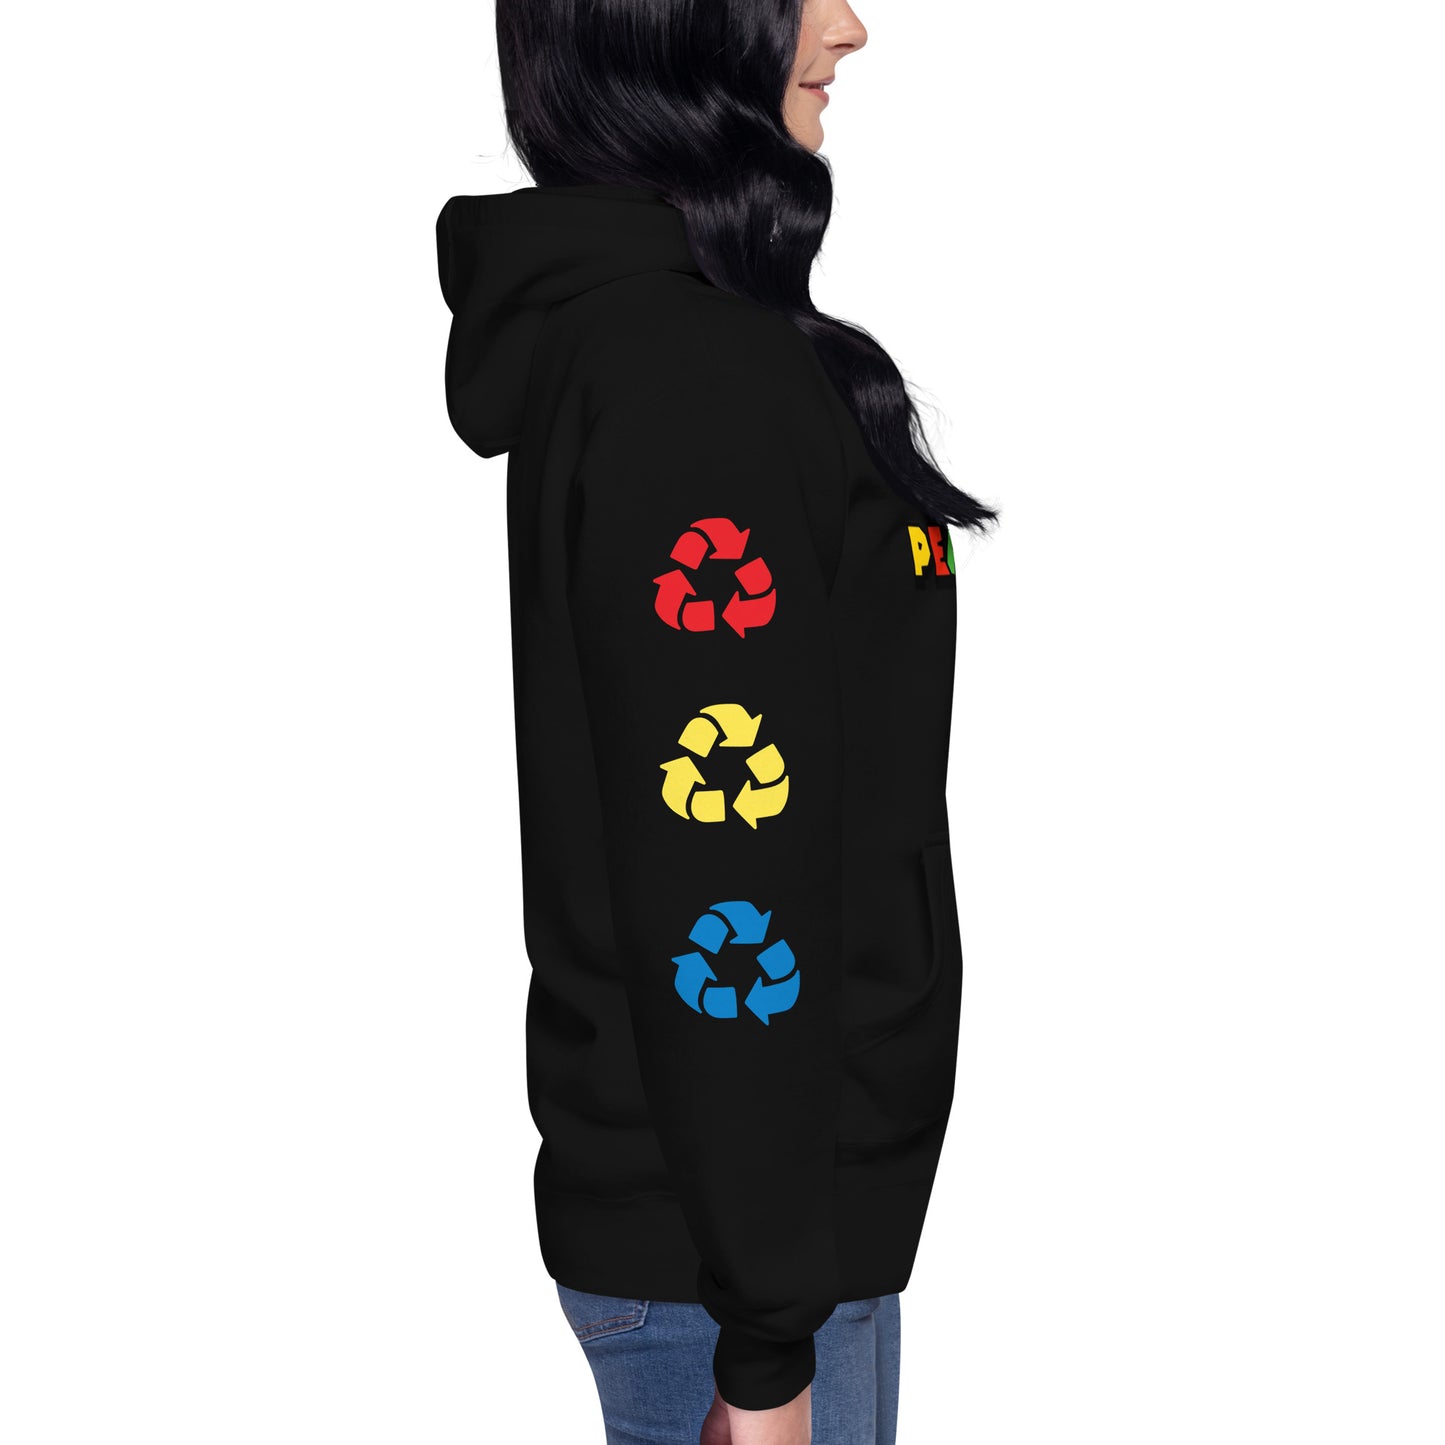 Stay Peaceful Game On Hoodie